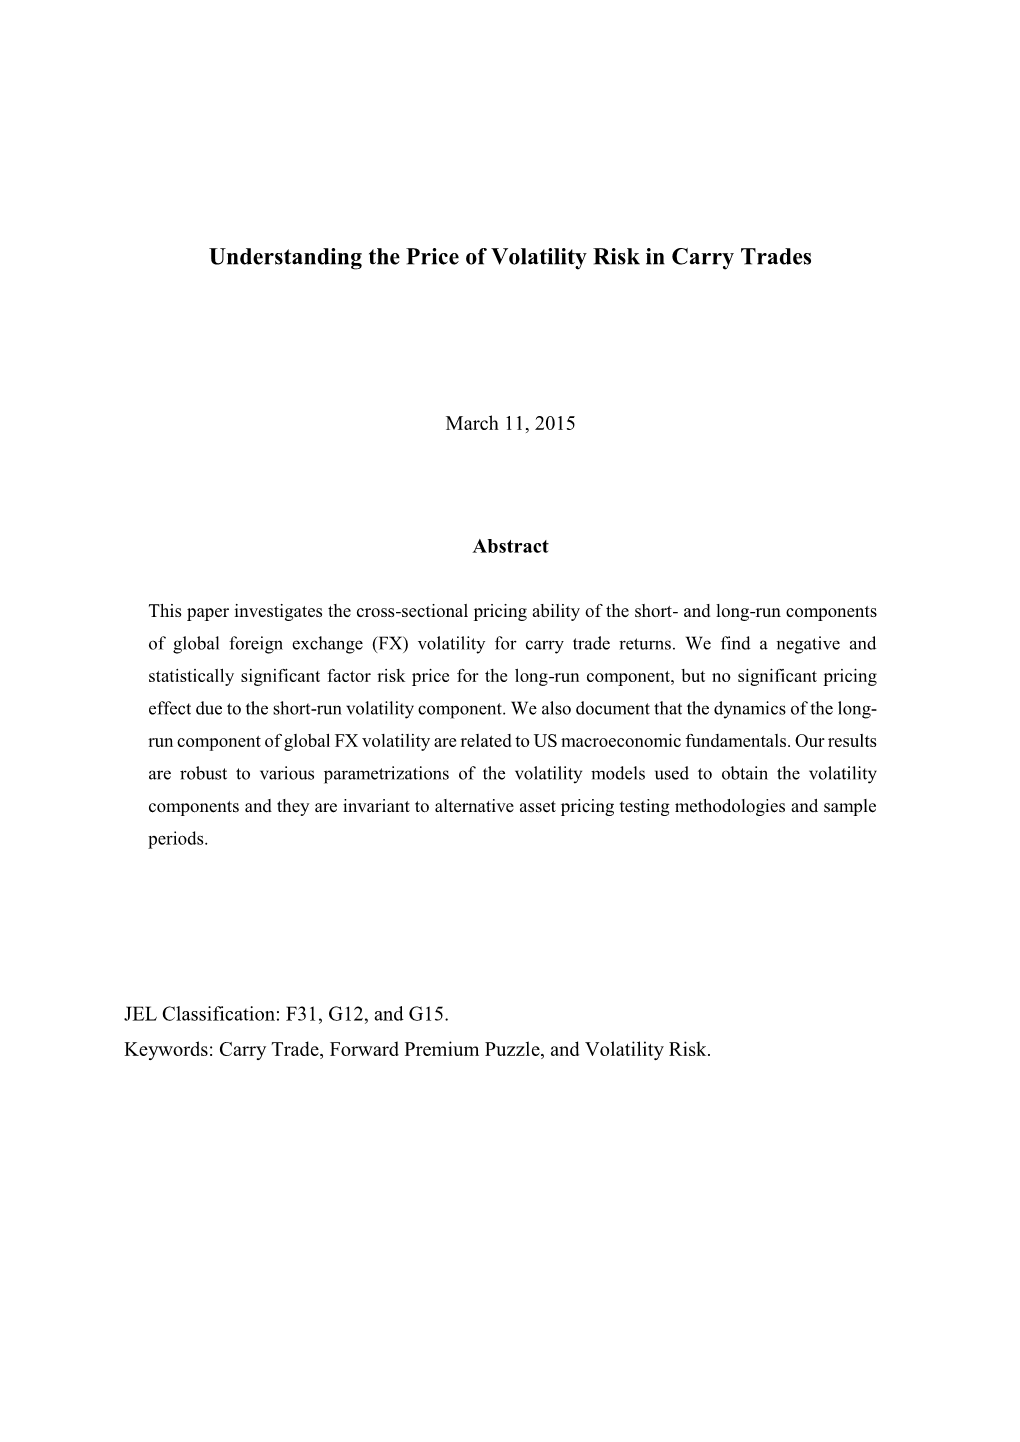 Understanding the Price of Volatility Risk in Carry Trades